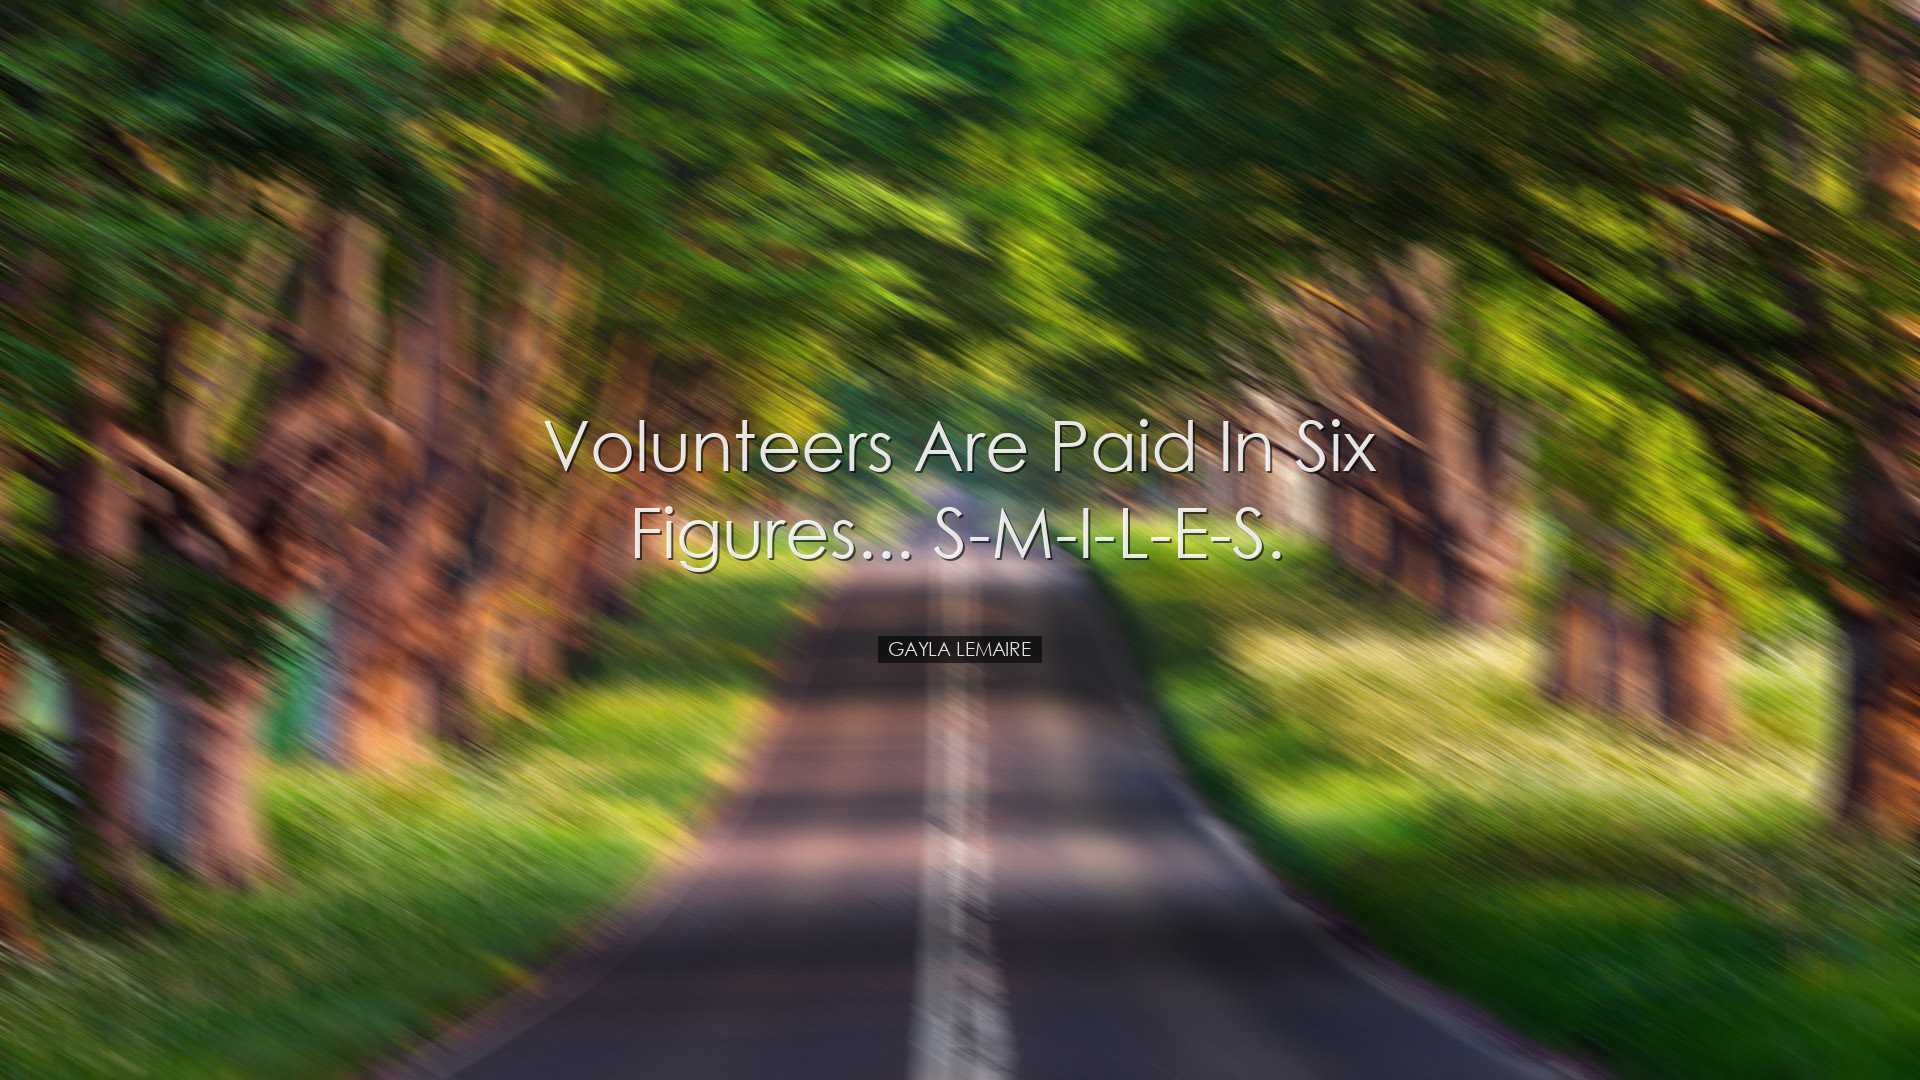 Volunteers are paid in six figures... S-M-I-L-E-S. - Gayla LeMaire